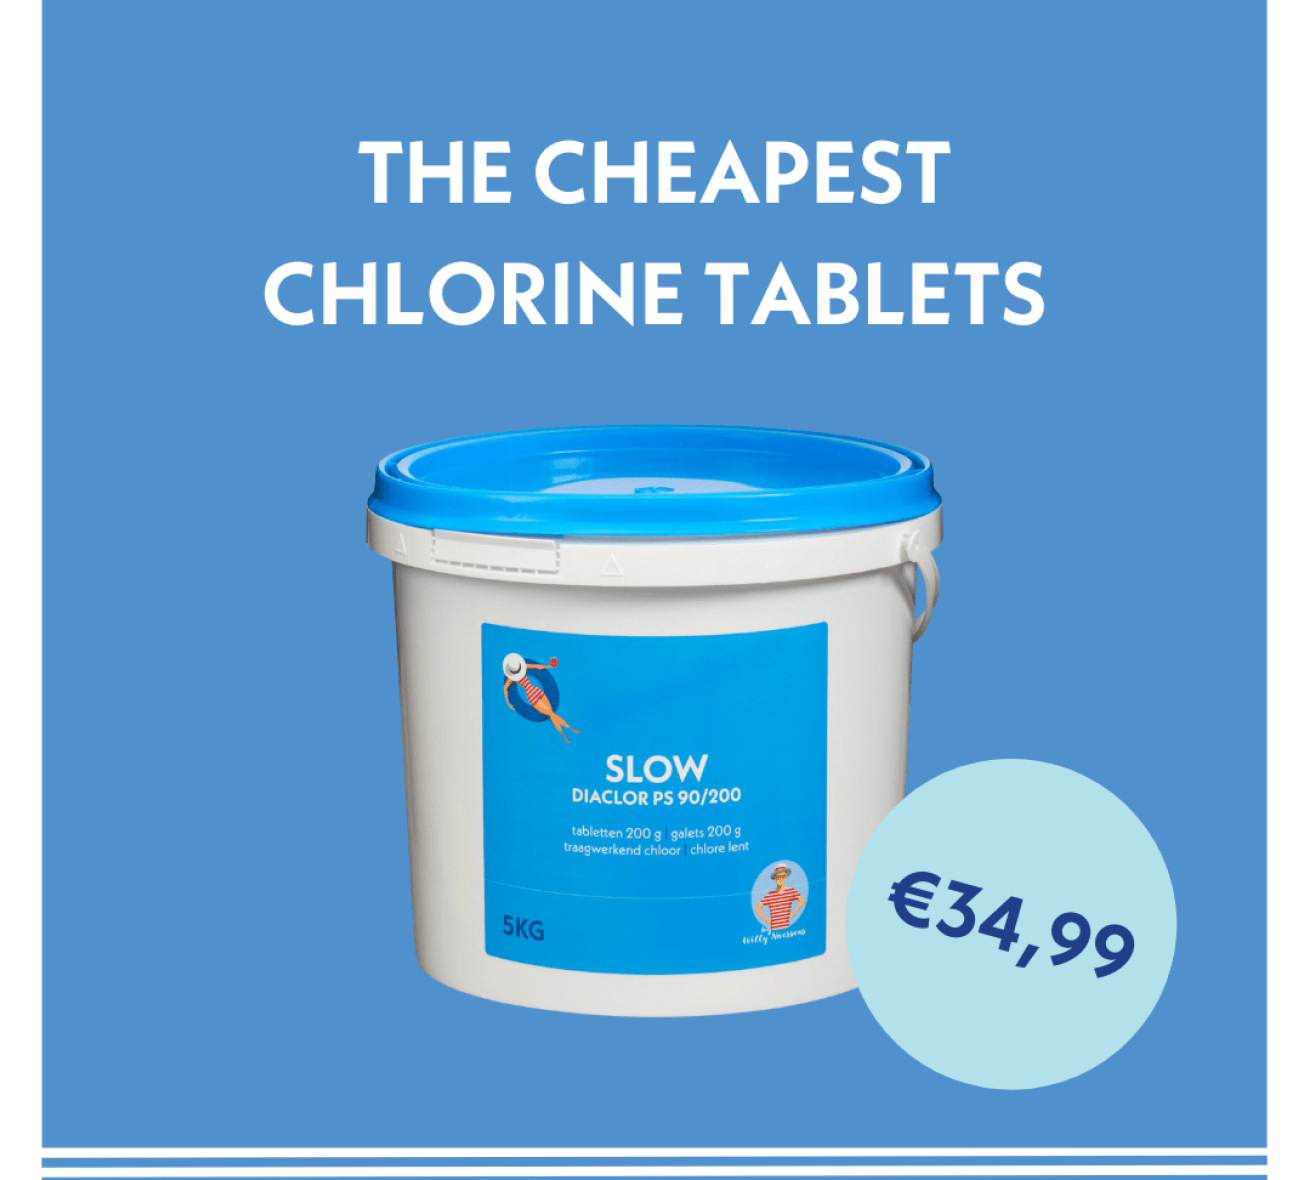 The cheapest chlorine tablets